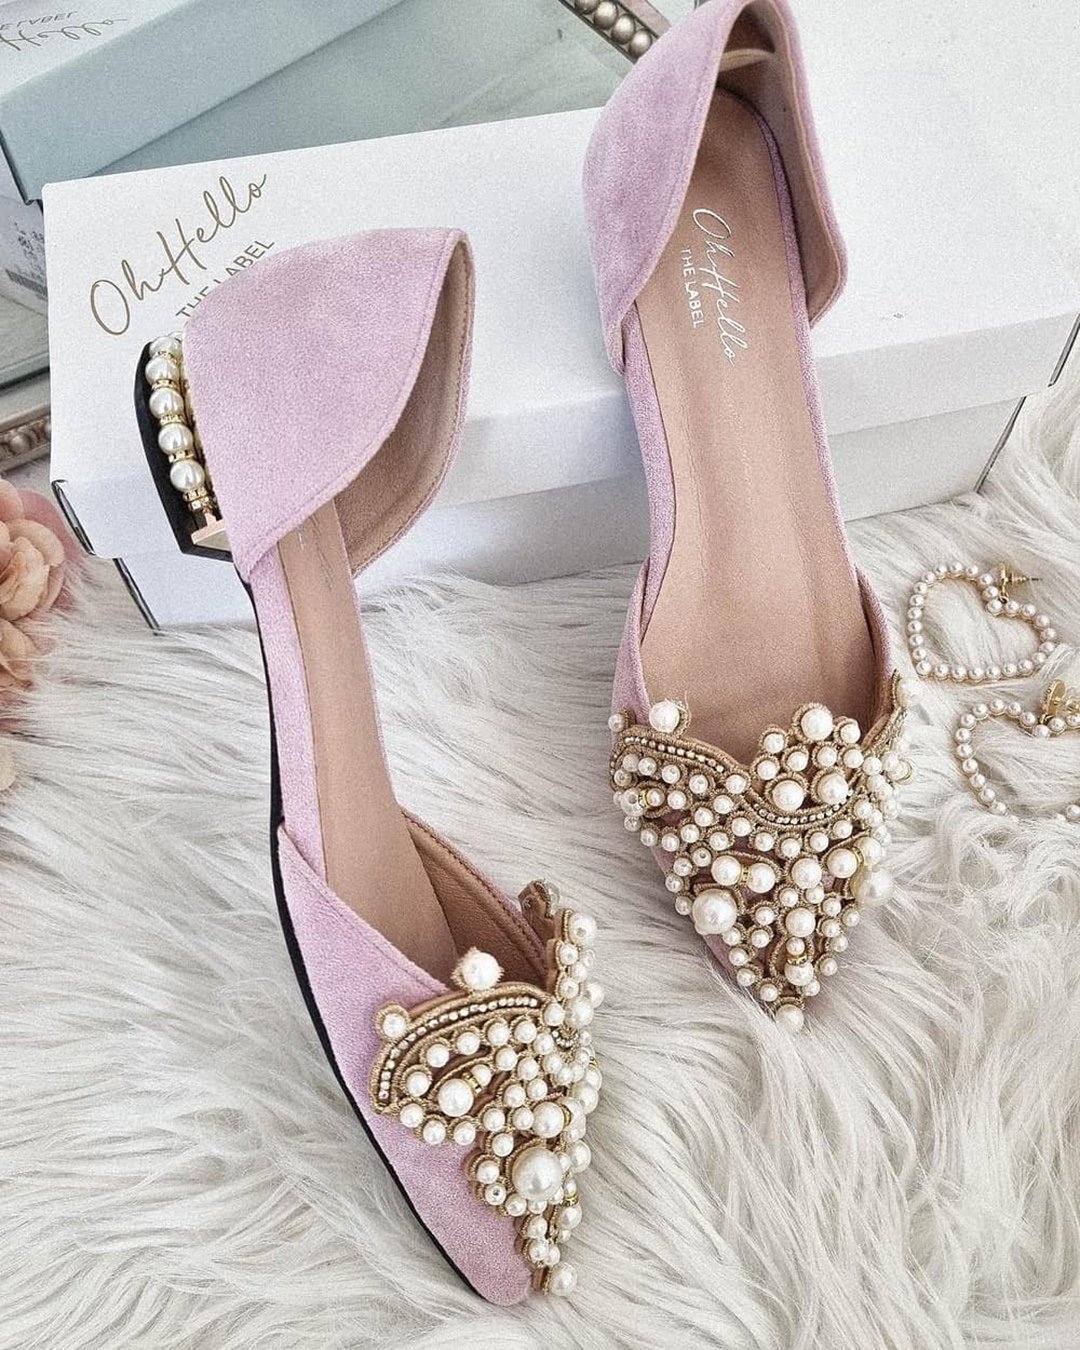 comfortable wedding shoes flats with stones blush ohhelloclothing